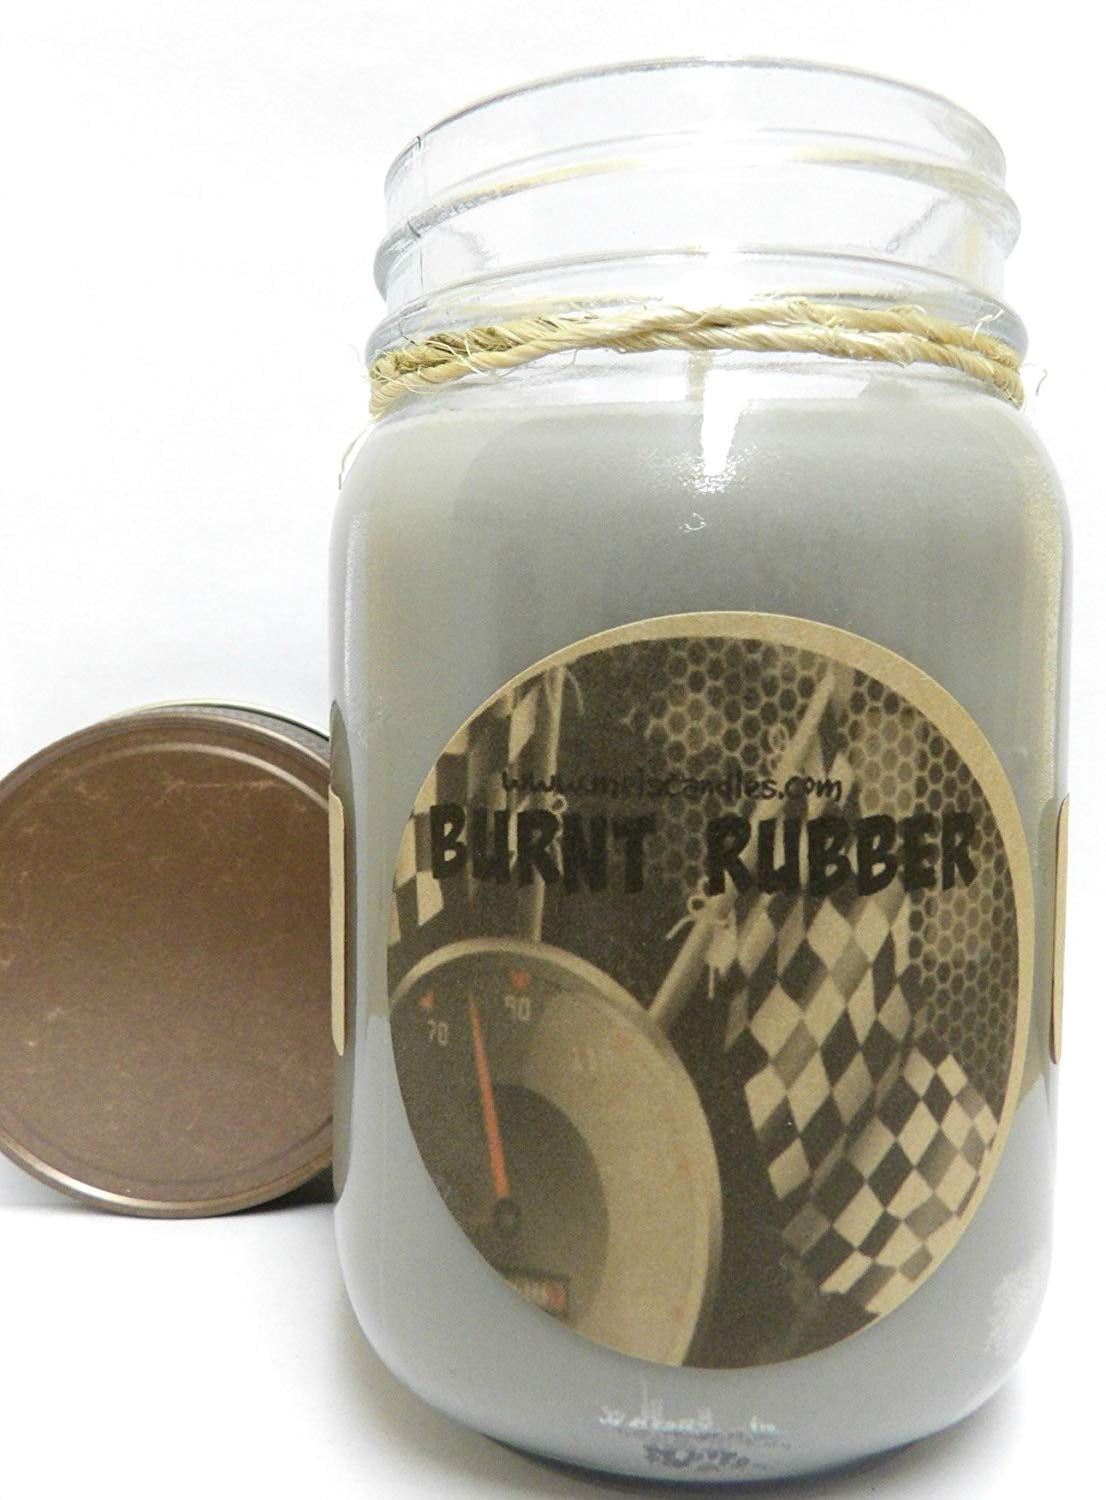 Burnt Rubber and Gun Powder Set of TWO 16oz Country Jar Soy Candles Grea COMBO 